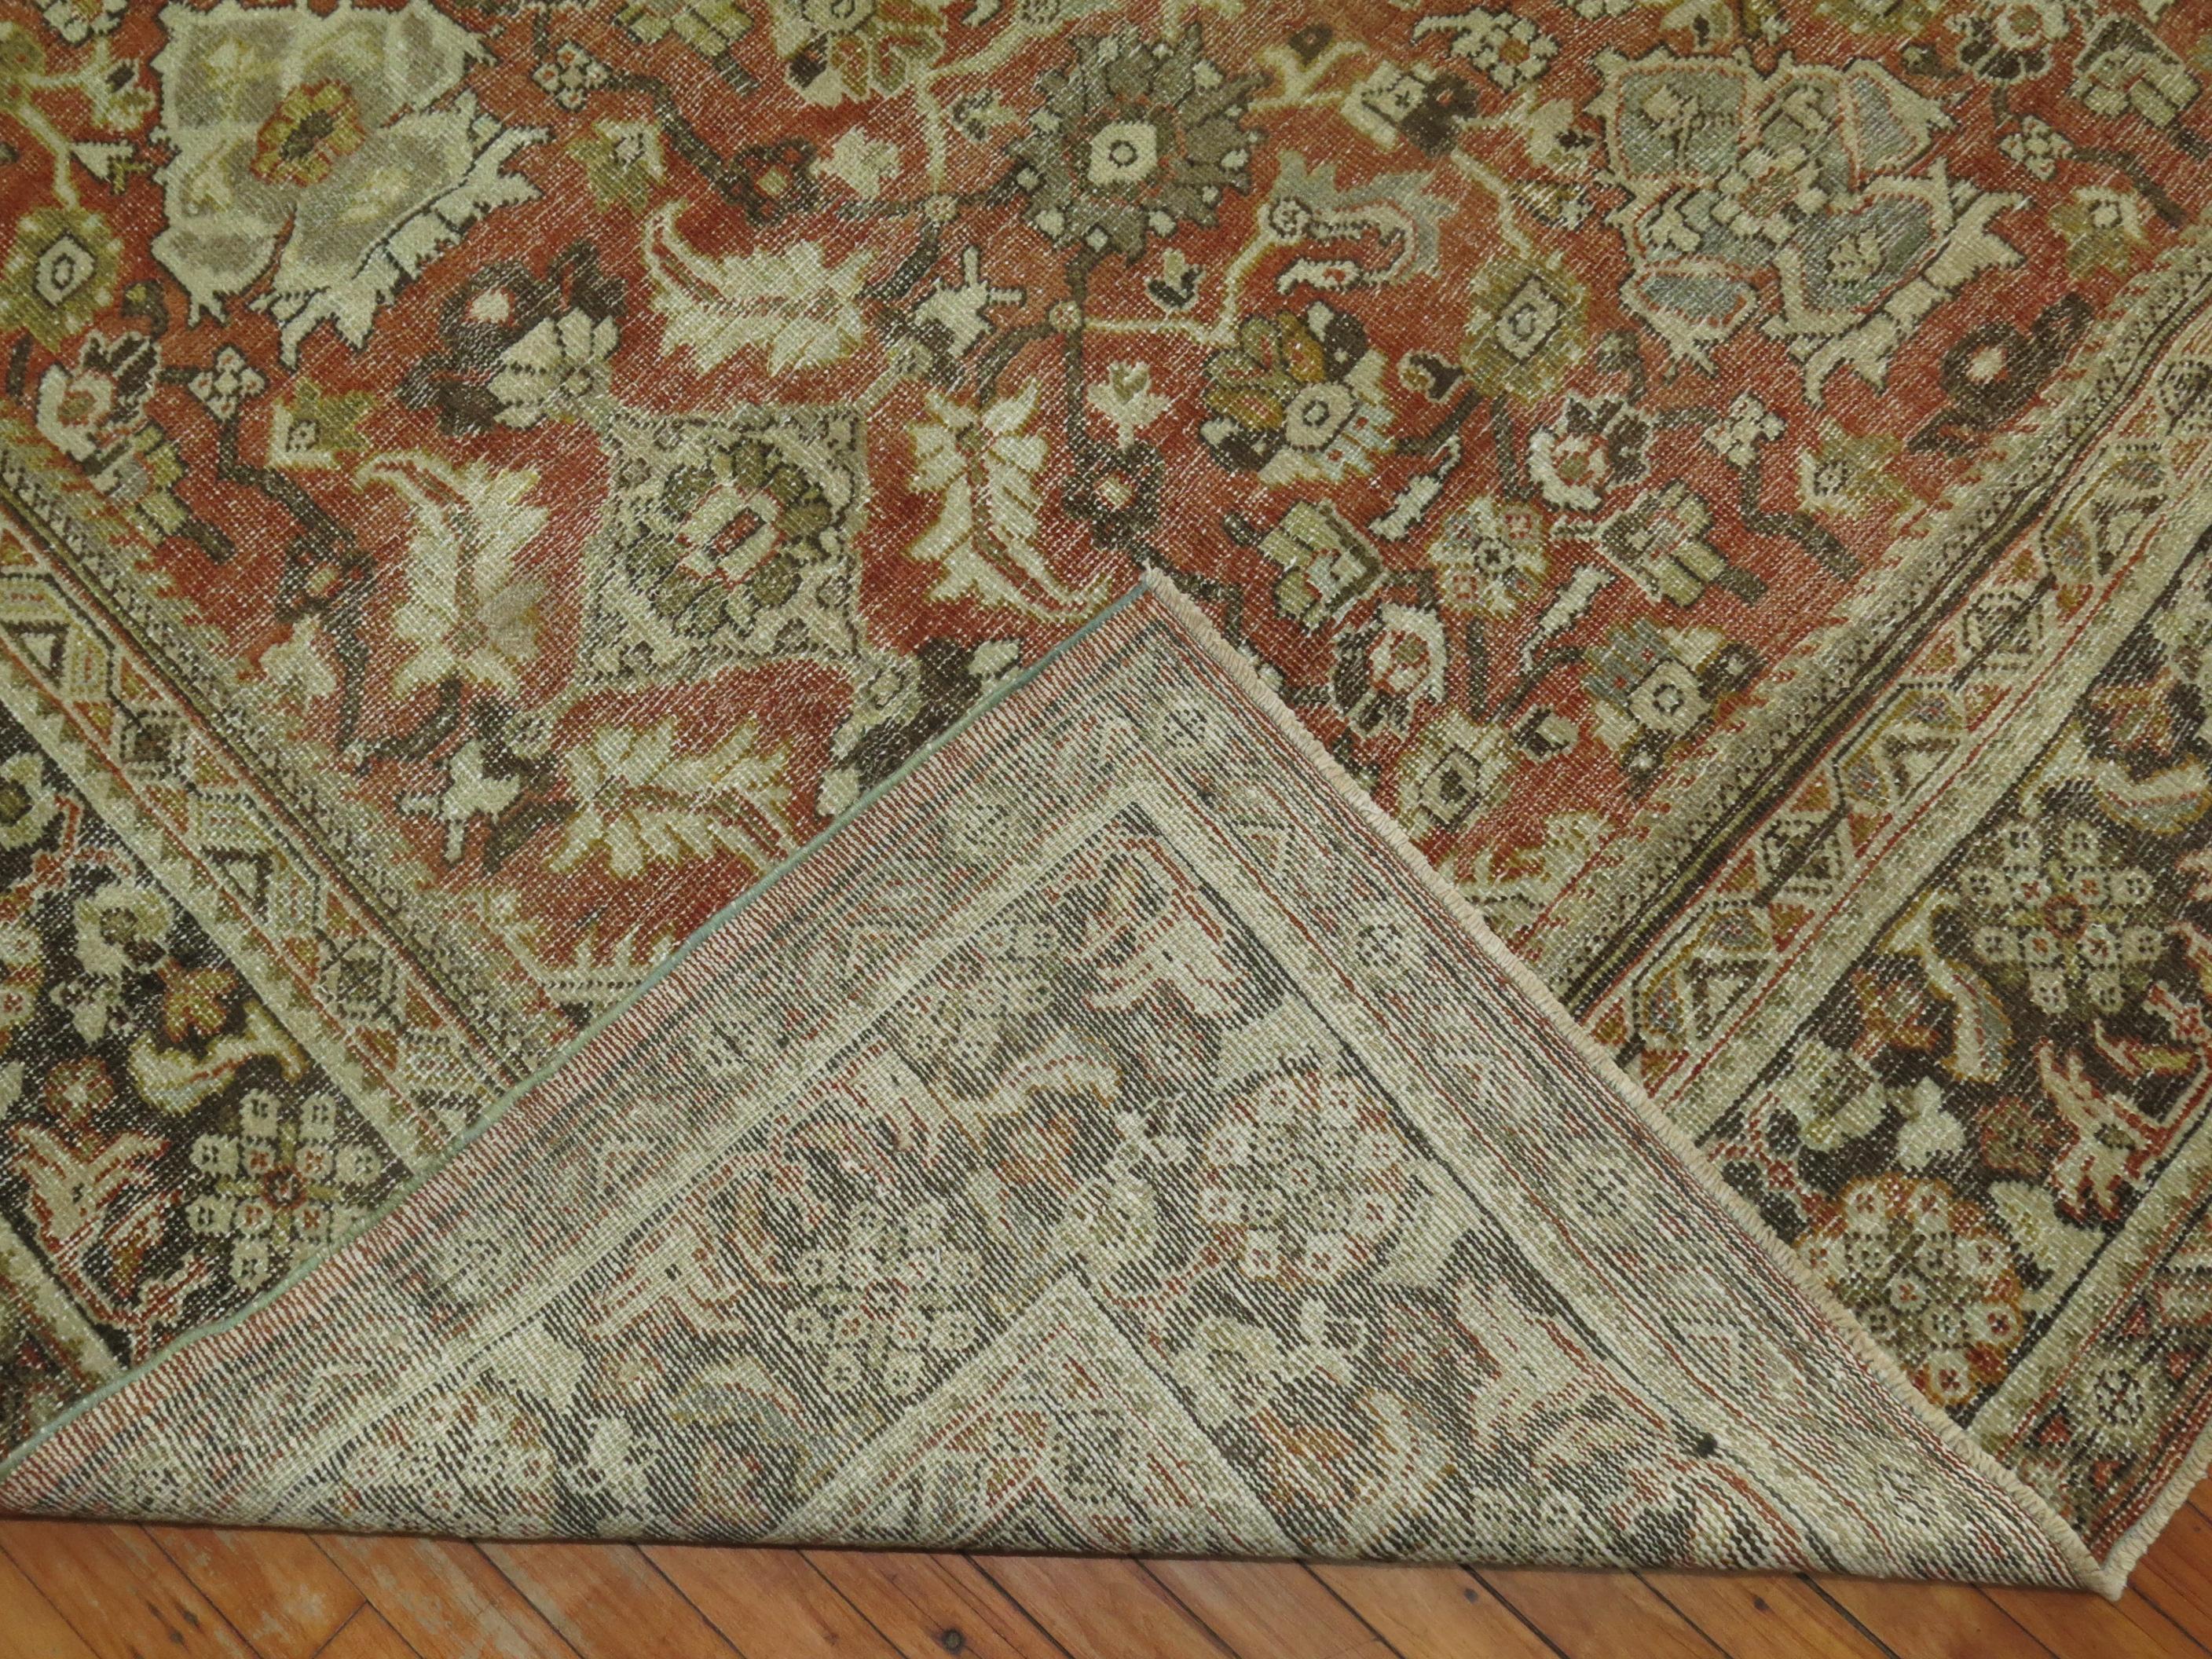 Room size early 20th century antique Persian Mahal rug in rustic colors

Measures: 8'11